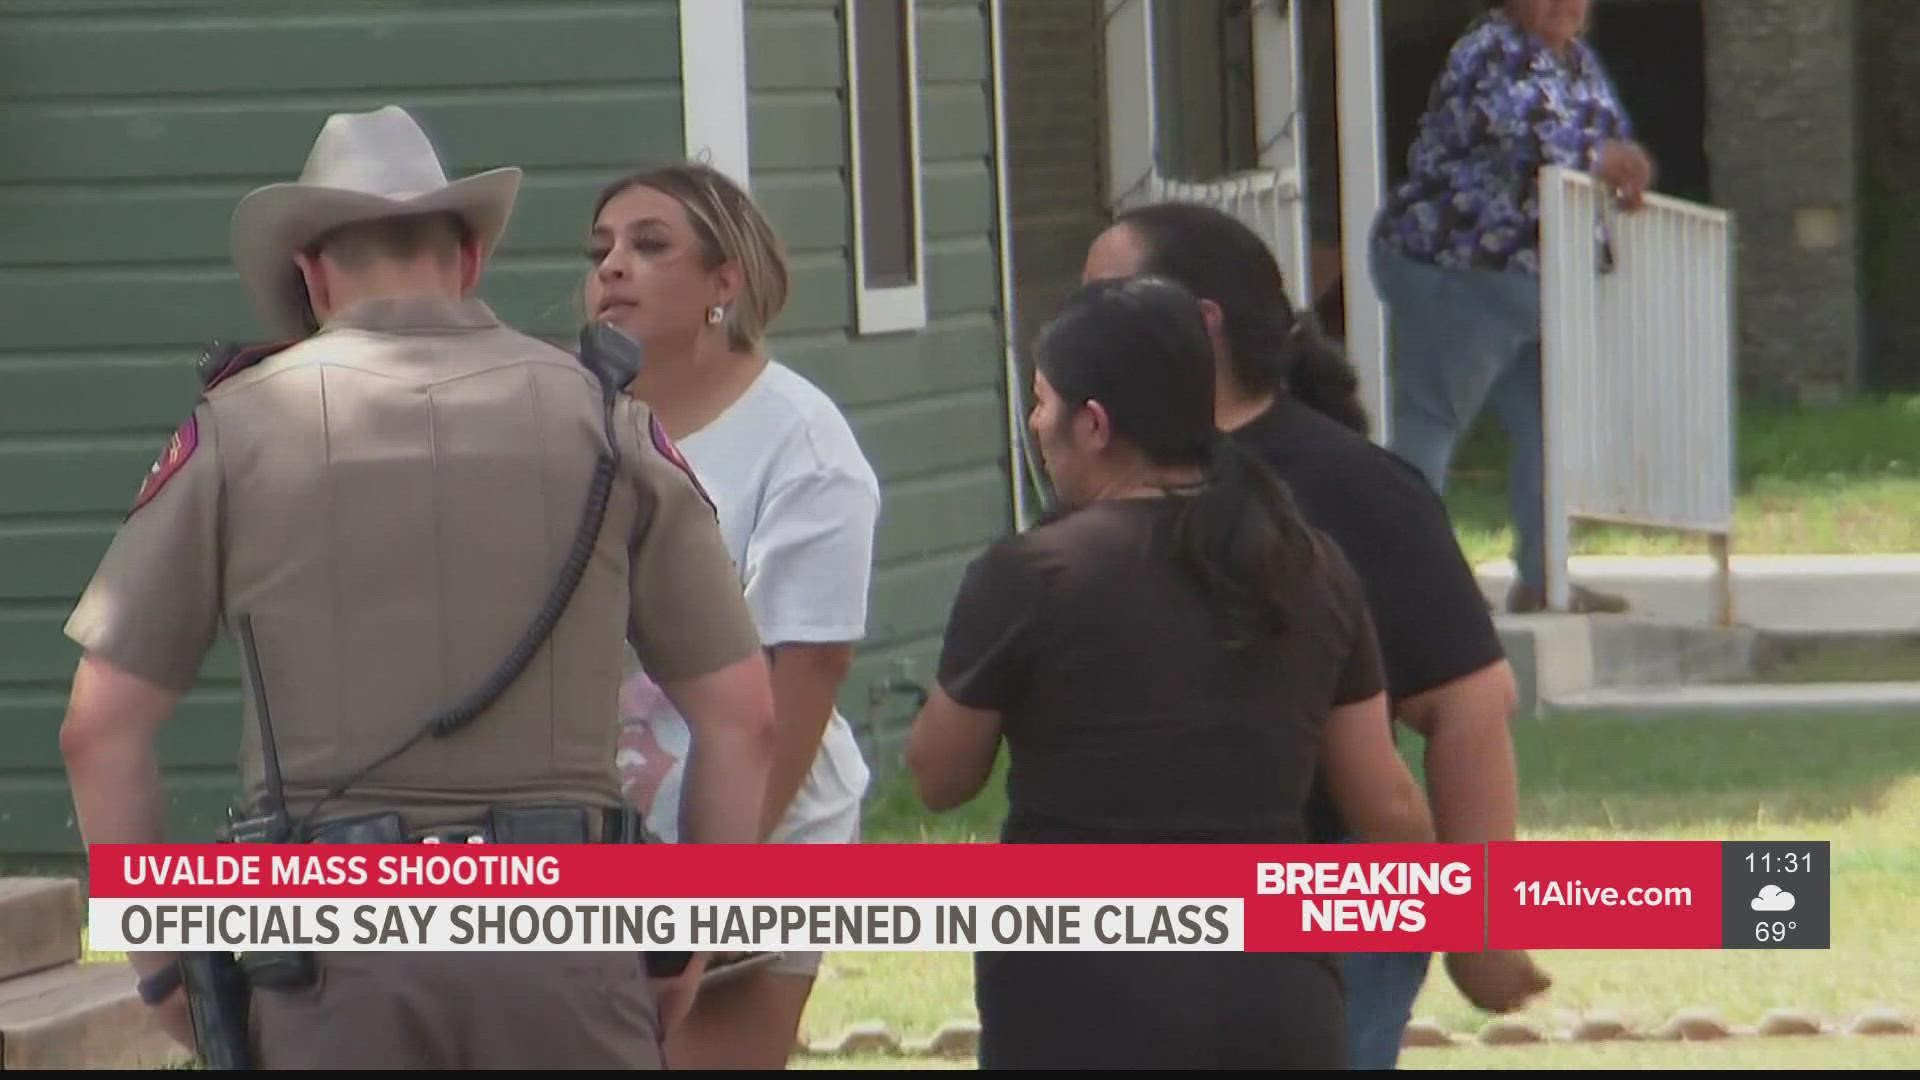 The Texas Department of Public Safety said Wednesday all of the victims killed in the shooting at Robb Elementary School were in the same fourth-grade classroom.